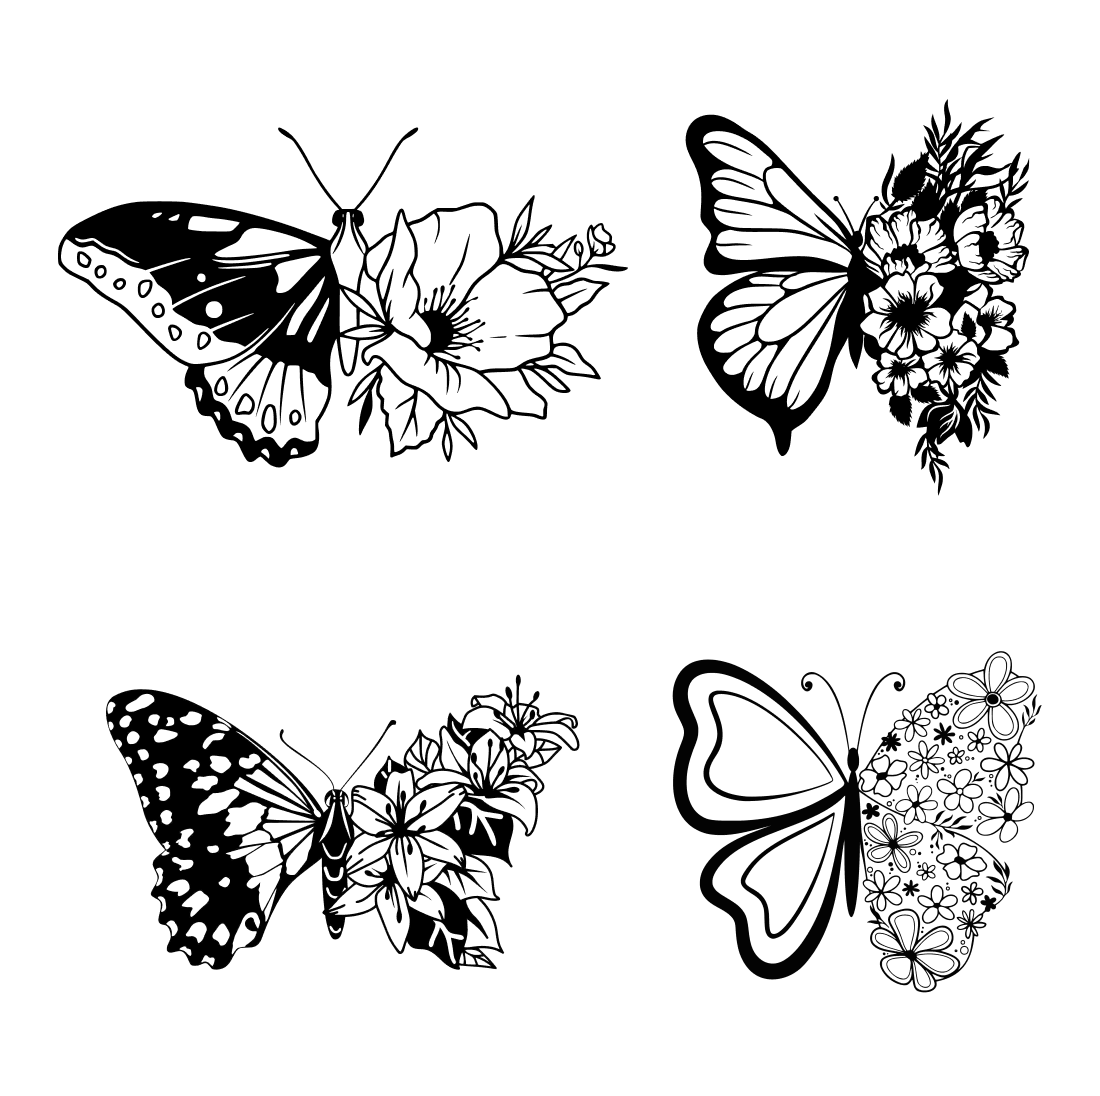 Black and White floral paper butterfly svg